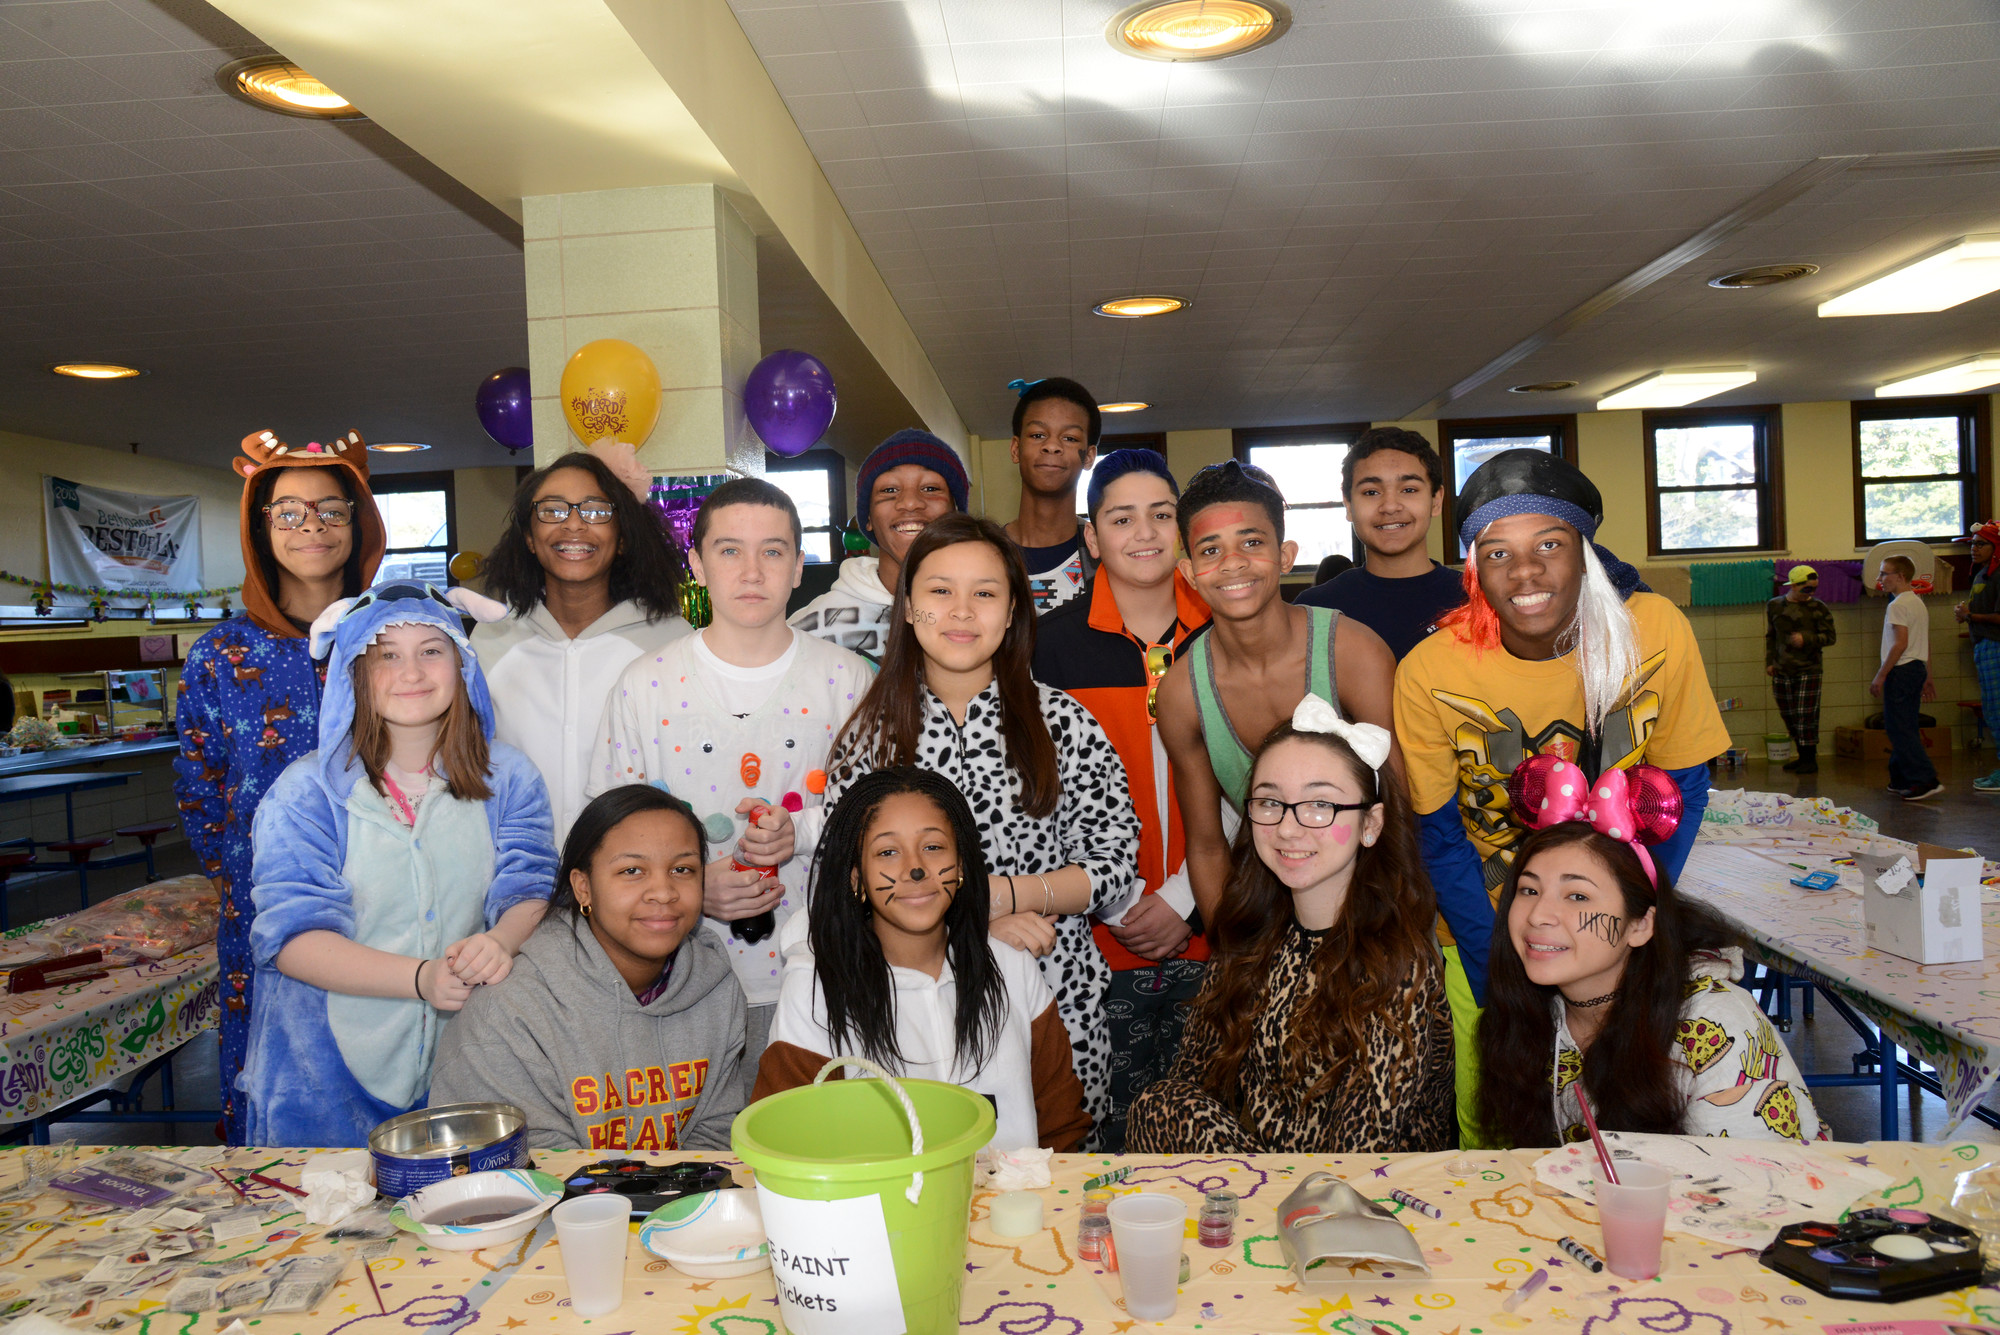 Eighth Graders at St. Christopher School hosted a carnival on Feb. 13 with games, crafts and colorful outfits.